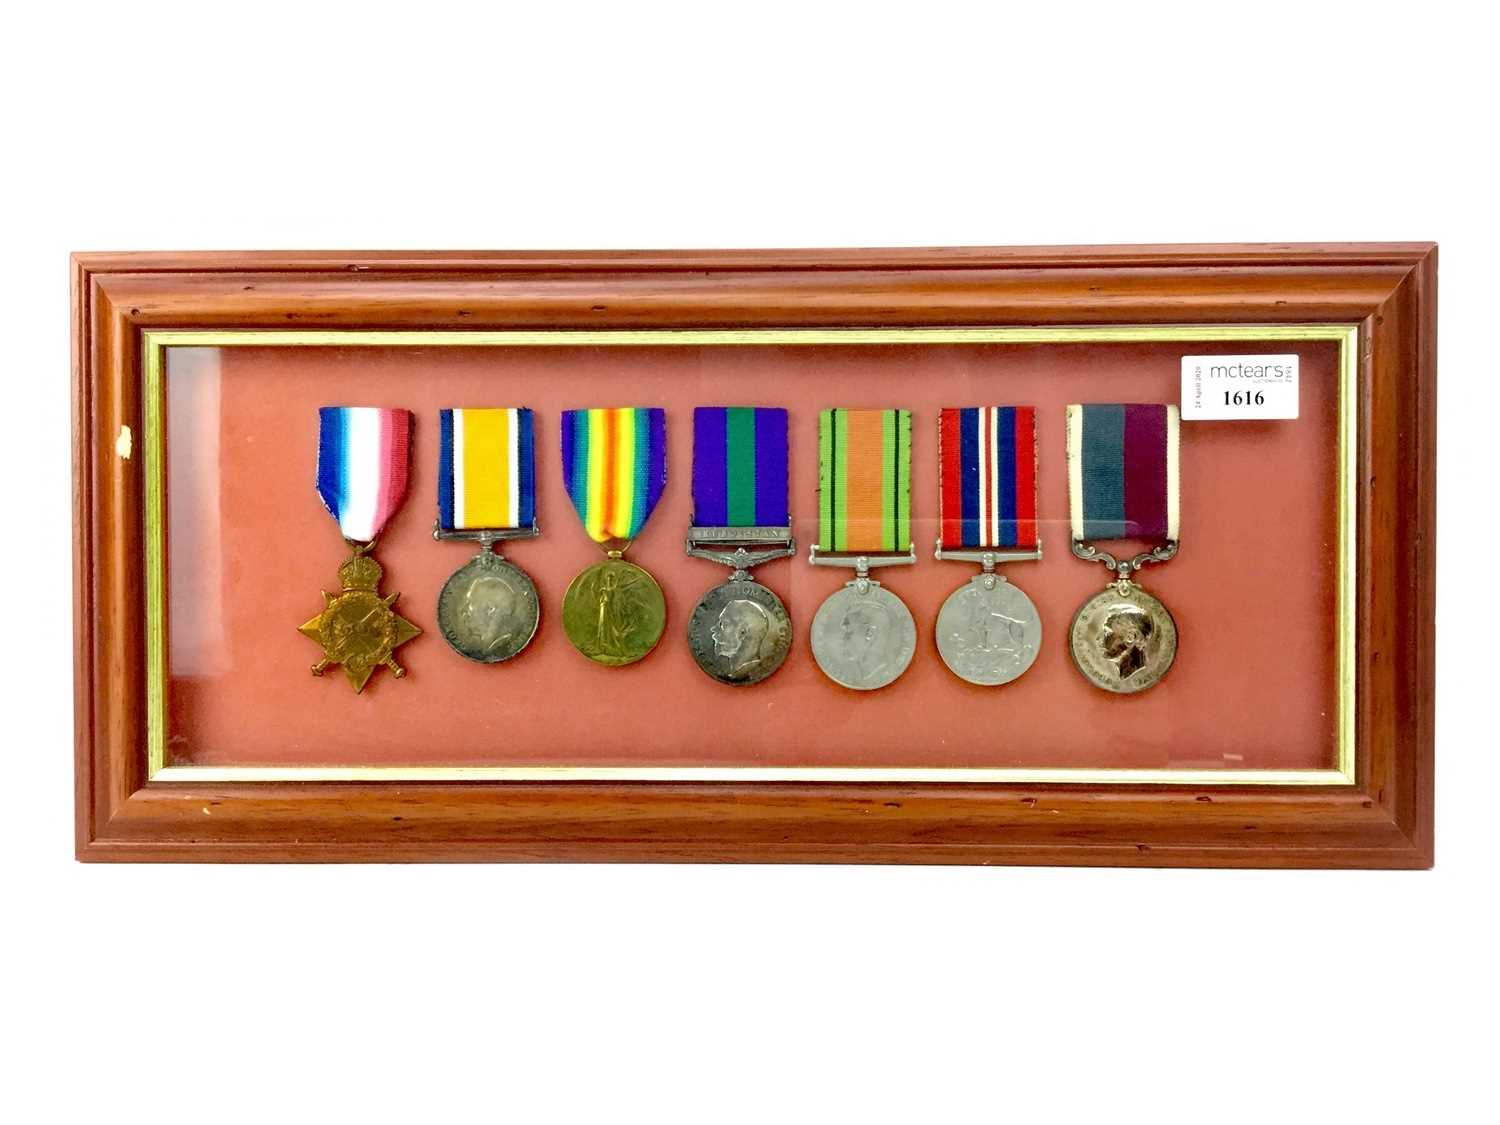 Lot 1616 - A FRAMED WORLD WAR MEDAL GROUP RELATING TO THE LOGUE FAMILY